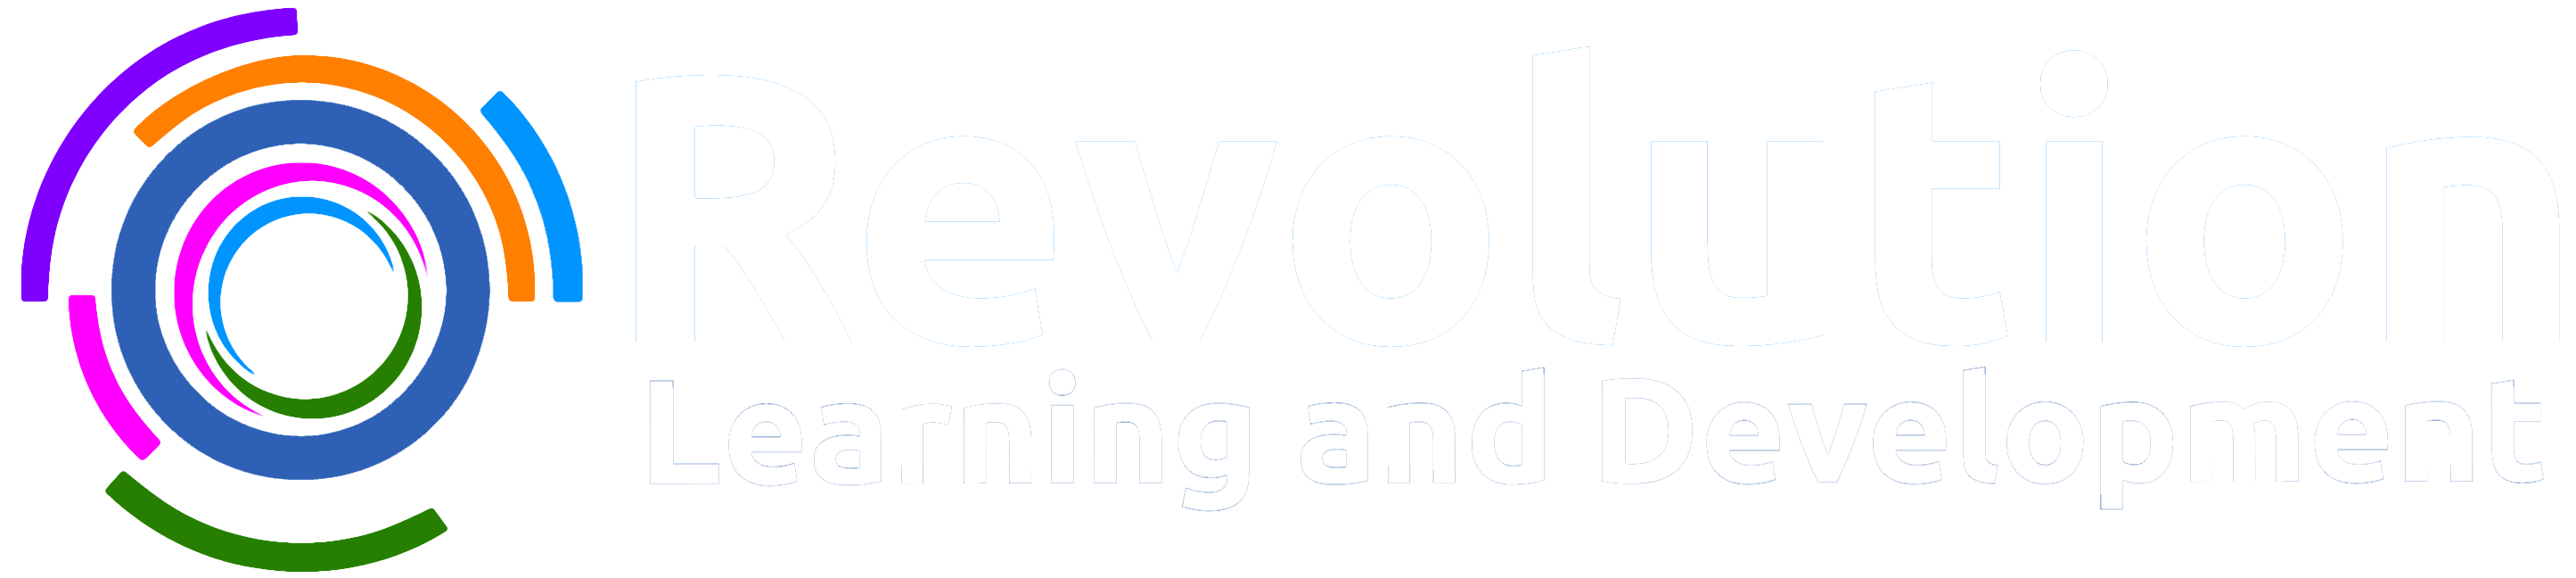 Revolution Learning and Development – USA